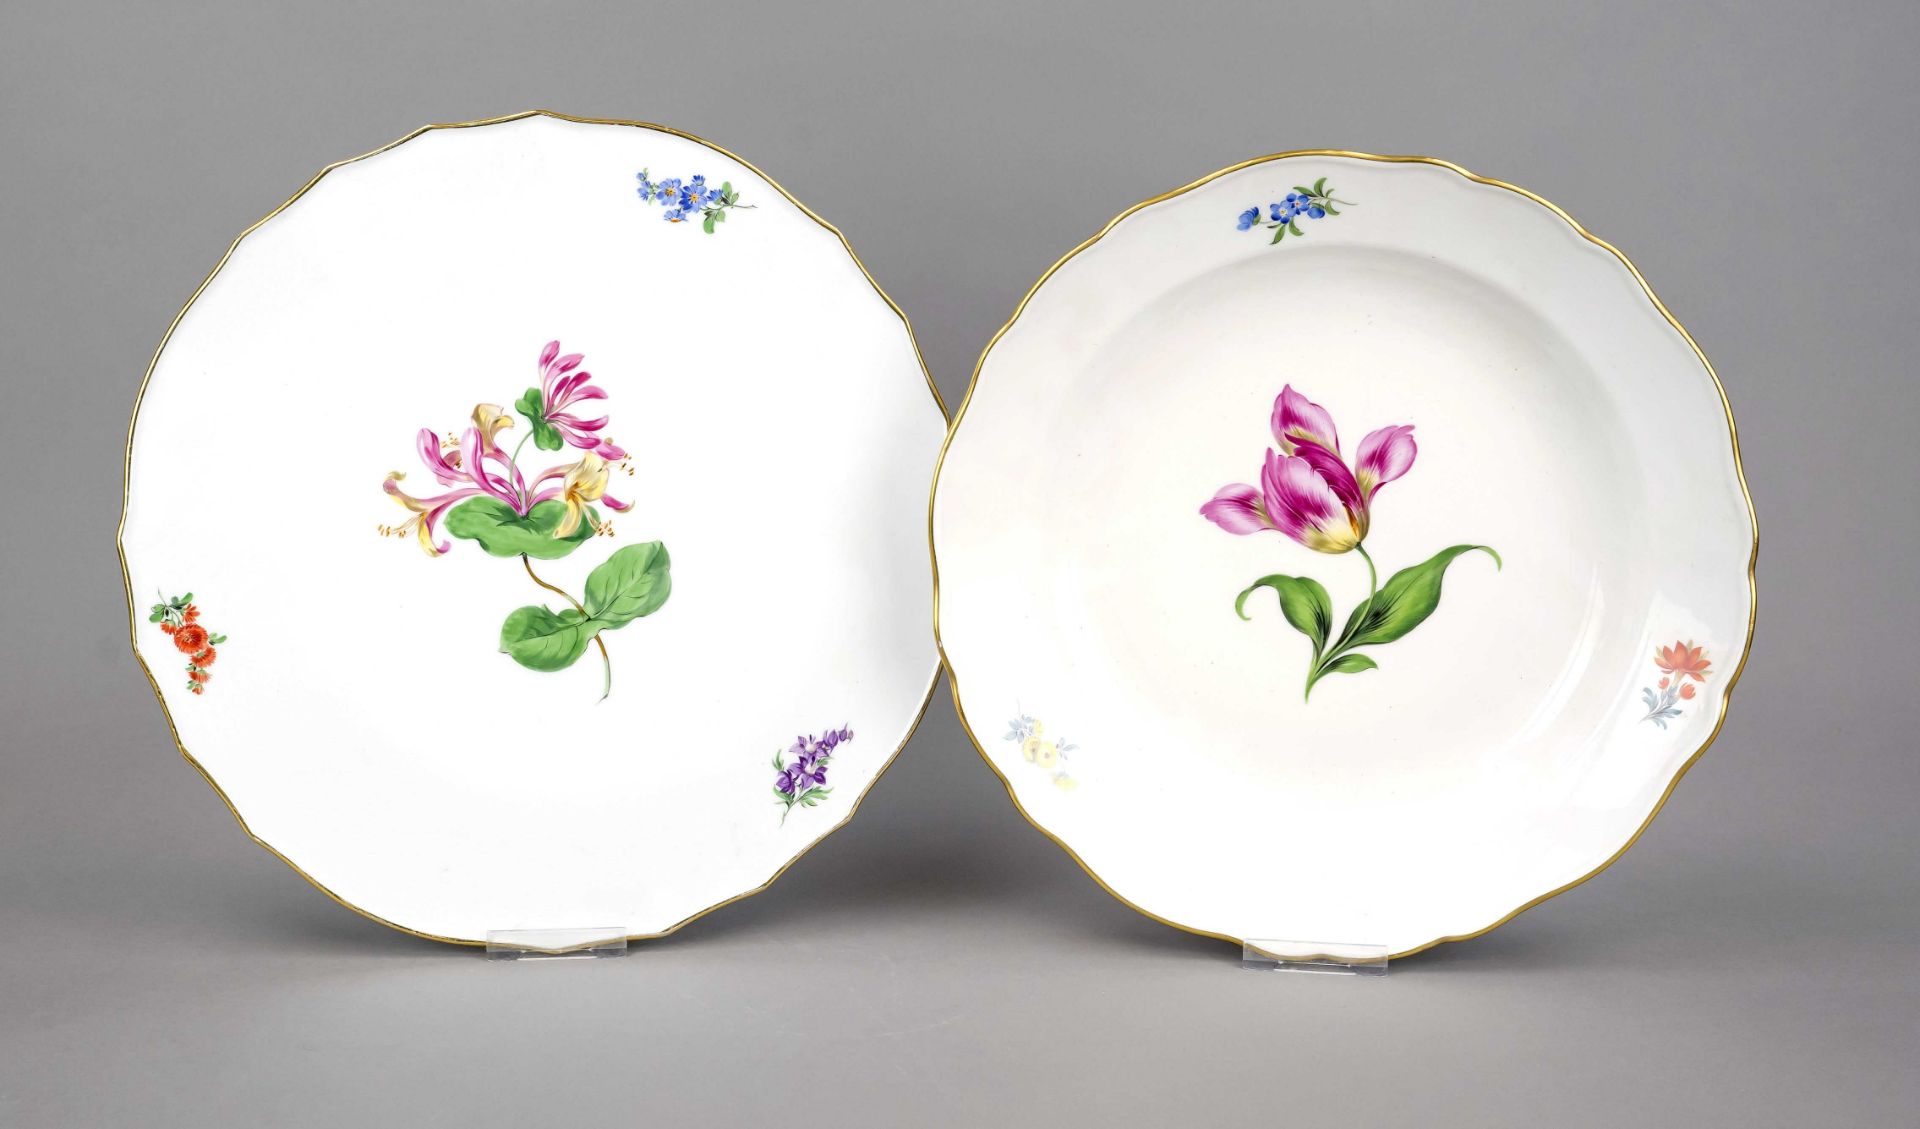 Cake plate and bowl, Meissen, 20th century, New cut-out shape, polychrome floral painting, flower